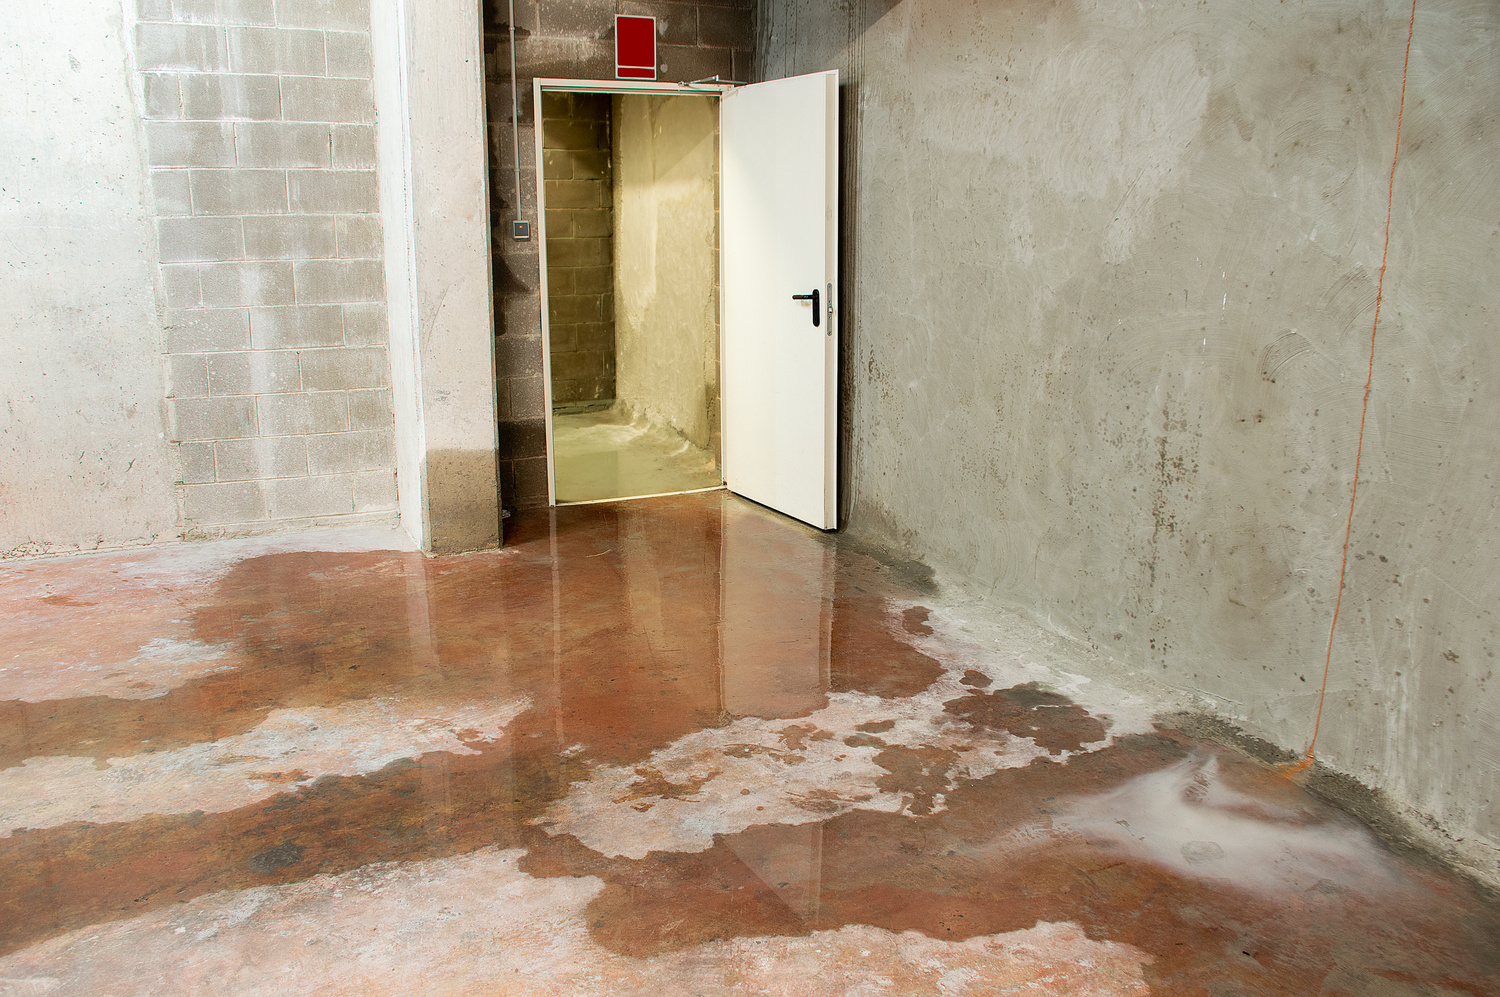 Basement Water Damage – What You Need to Know